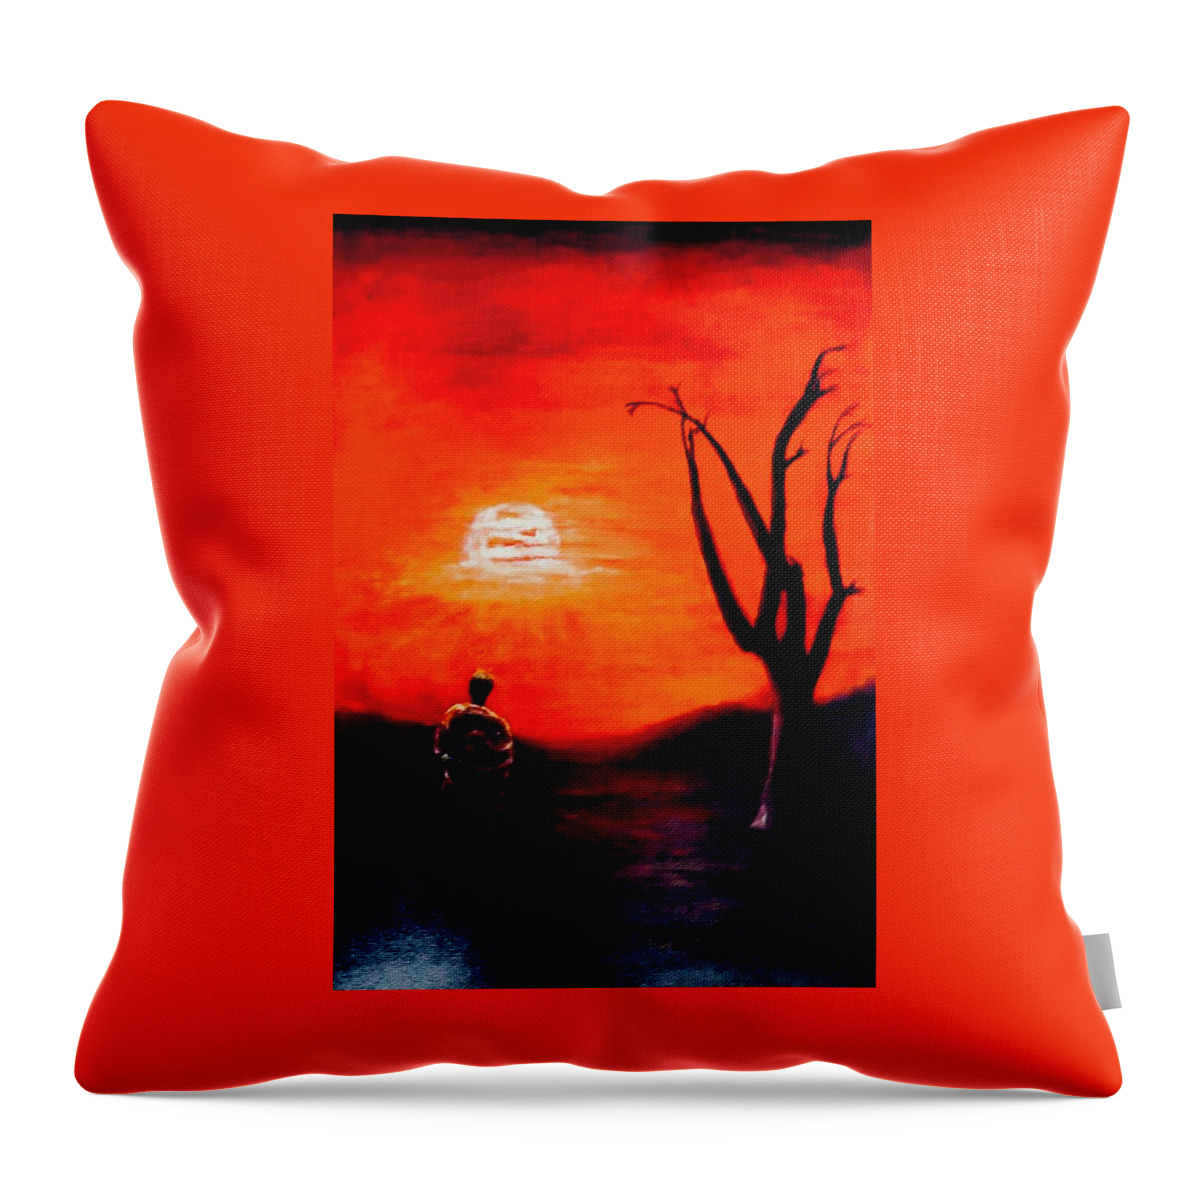 Landscape Throw Pillow featuring the painting New Day by Sher Nasser